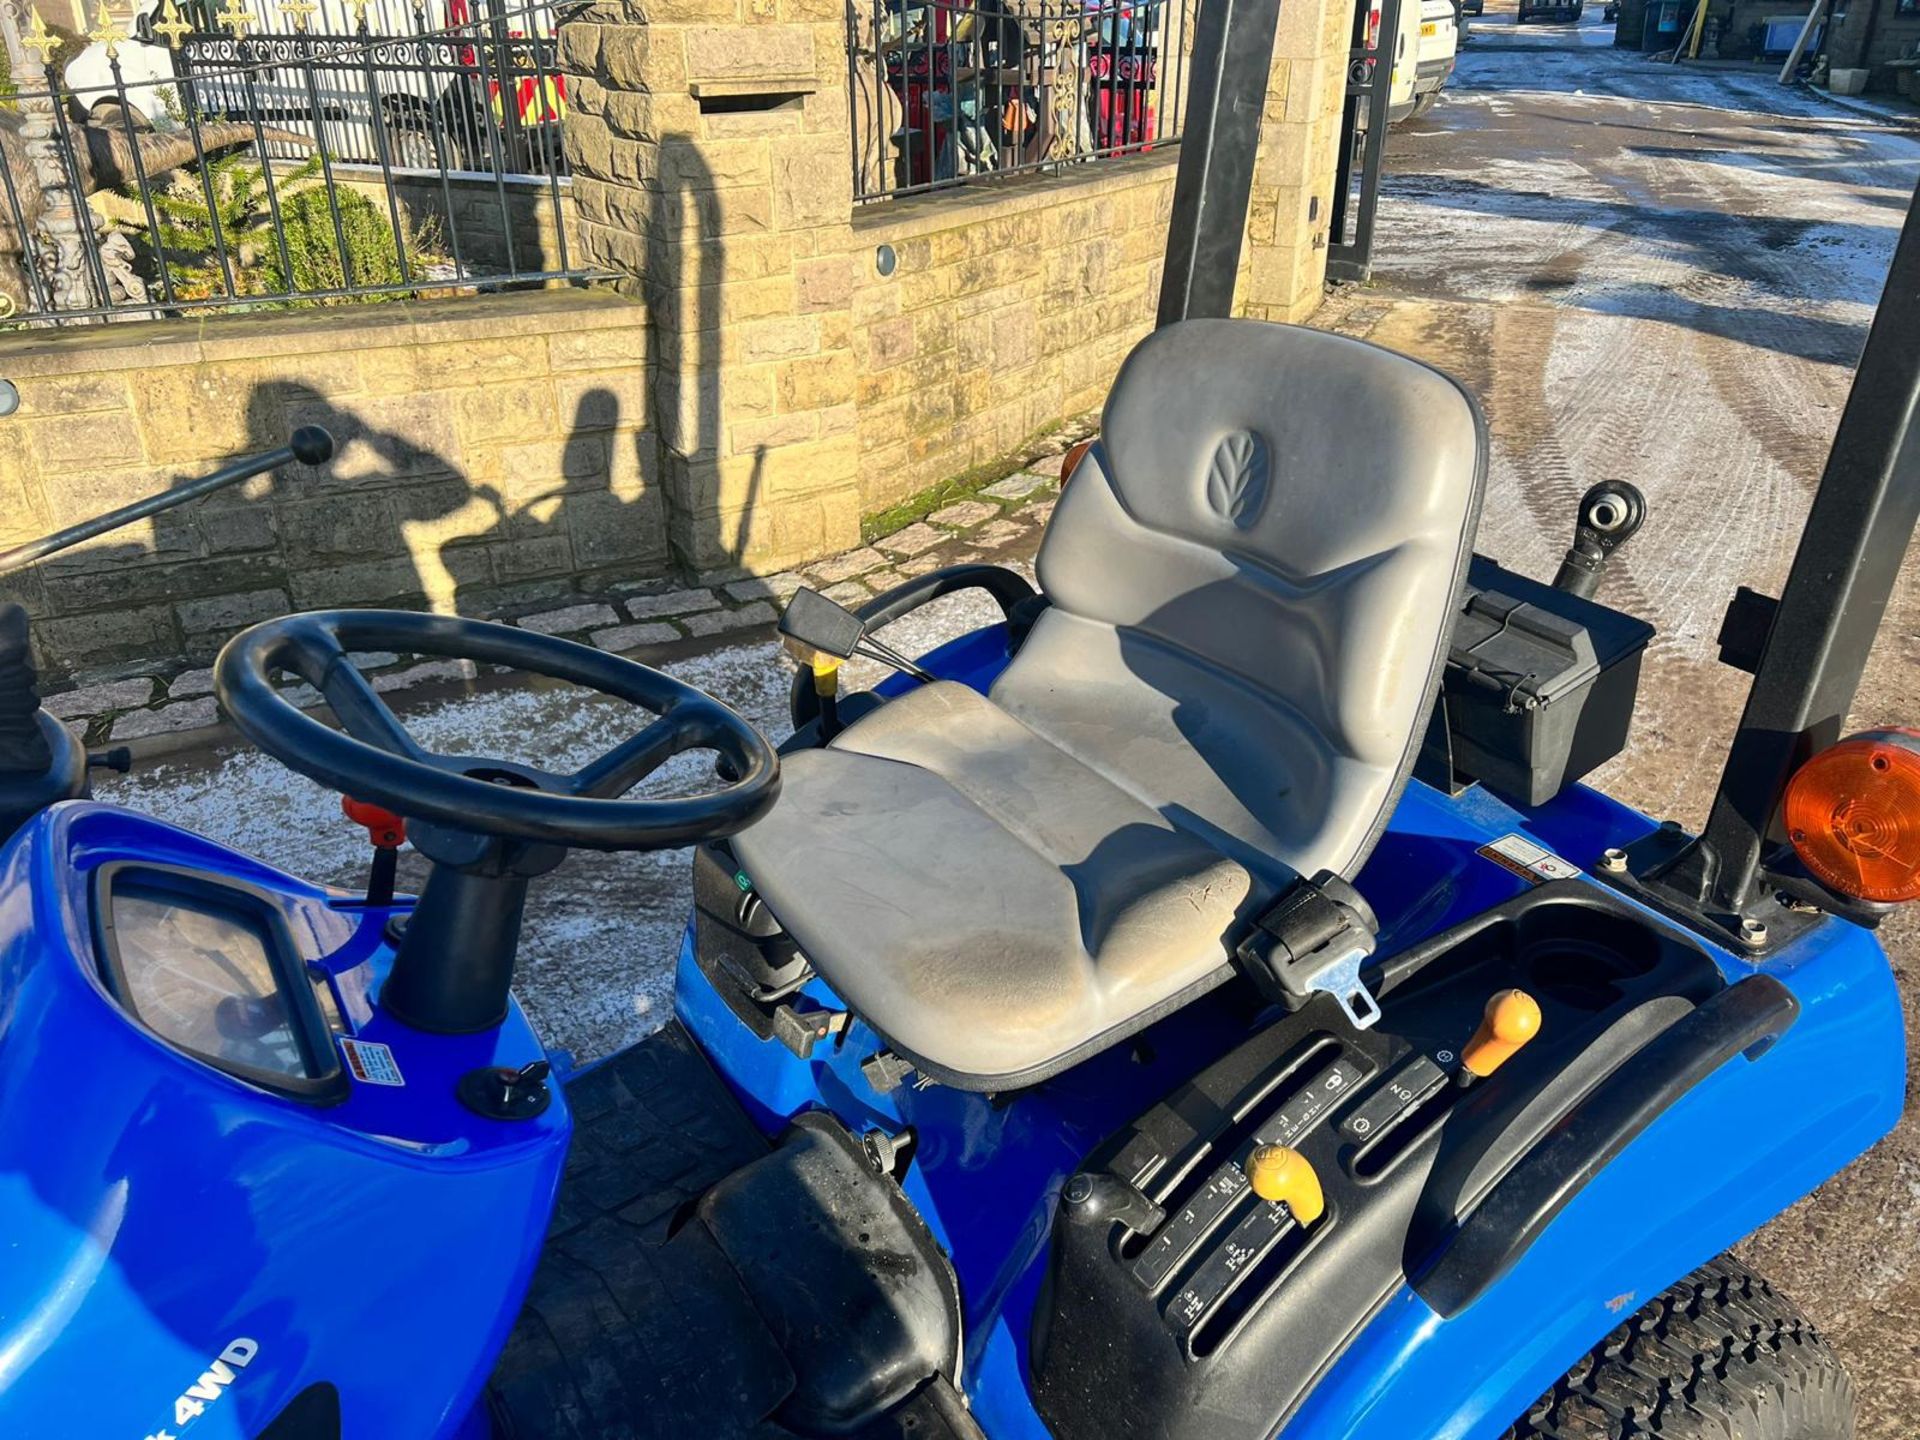 15 HRS FROM NEW ! New Holland Boomer TZ25DA 25HP 4WD Compact Tractor With 54” Underslung *PLUS VAT* - Image 13 of 24